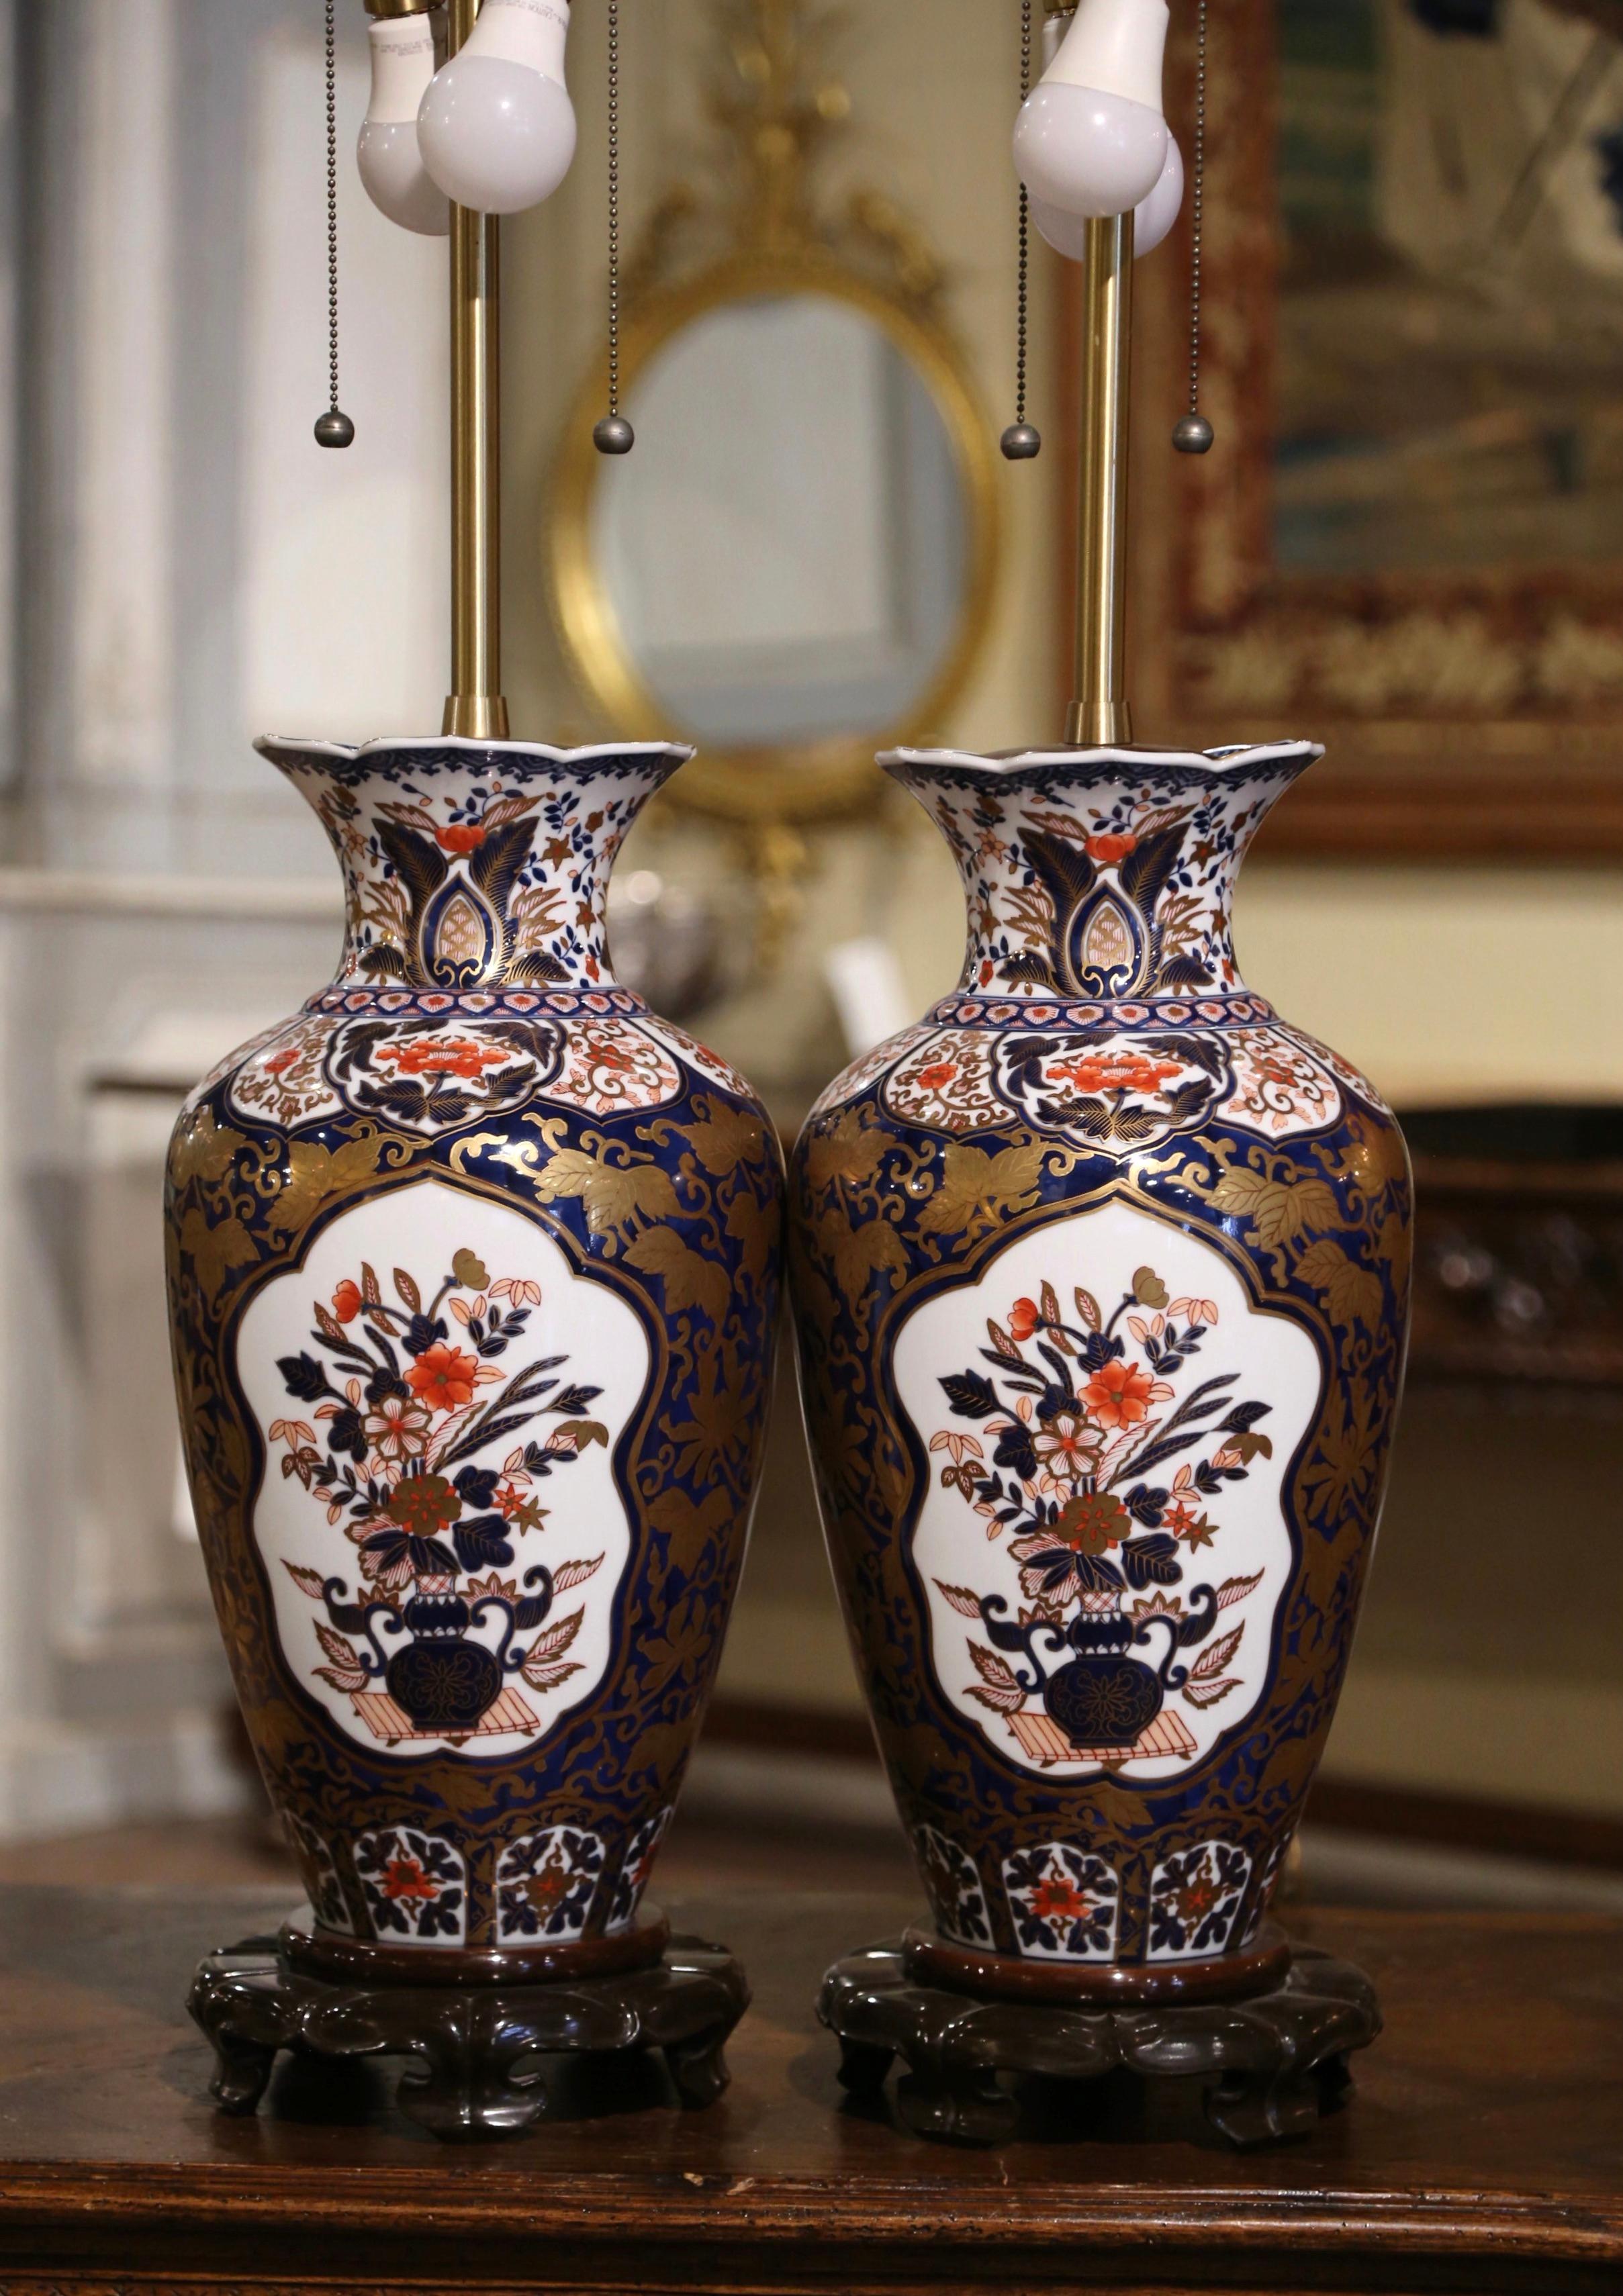 Pair of Early 20th Century Imari Porcelain Vases Mounted as Table Lamps  In Excellent Condition For Sale In Dallas, TX